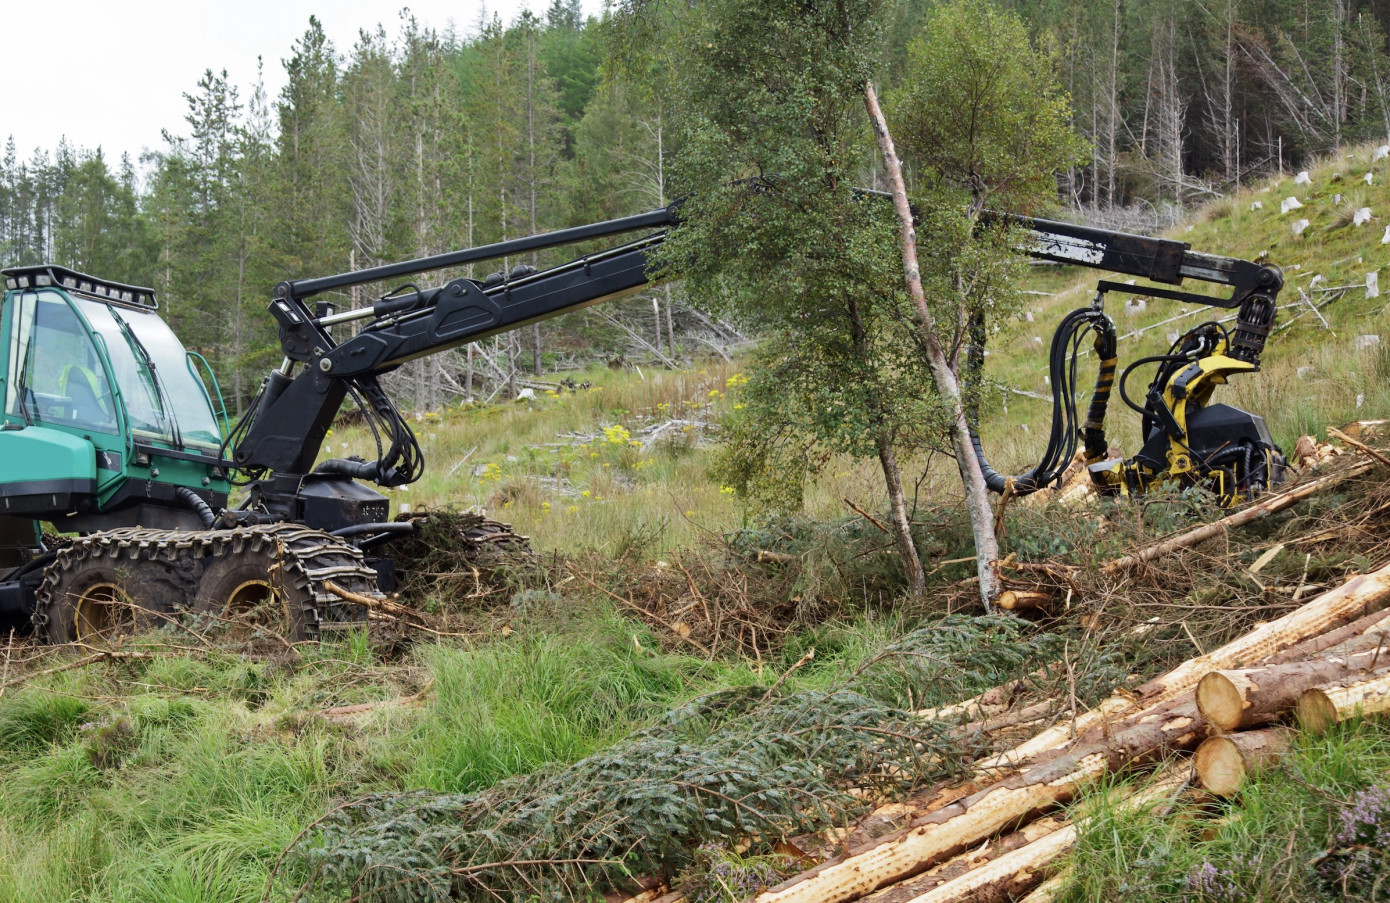 Swedish forest felling notifications rise in April